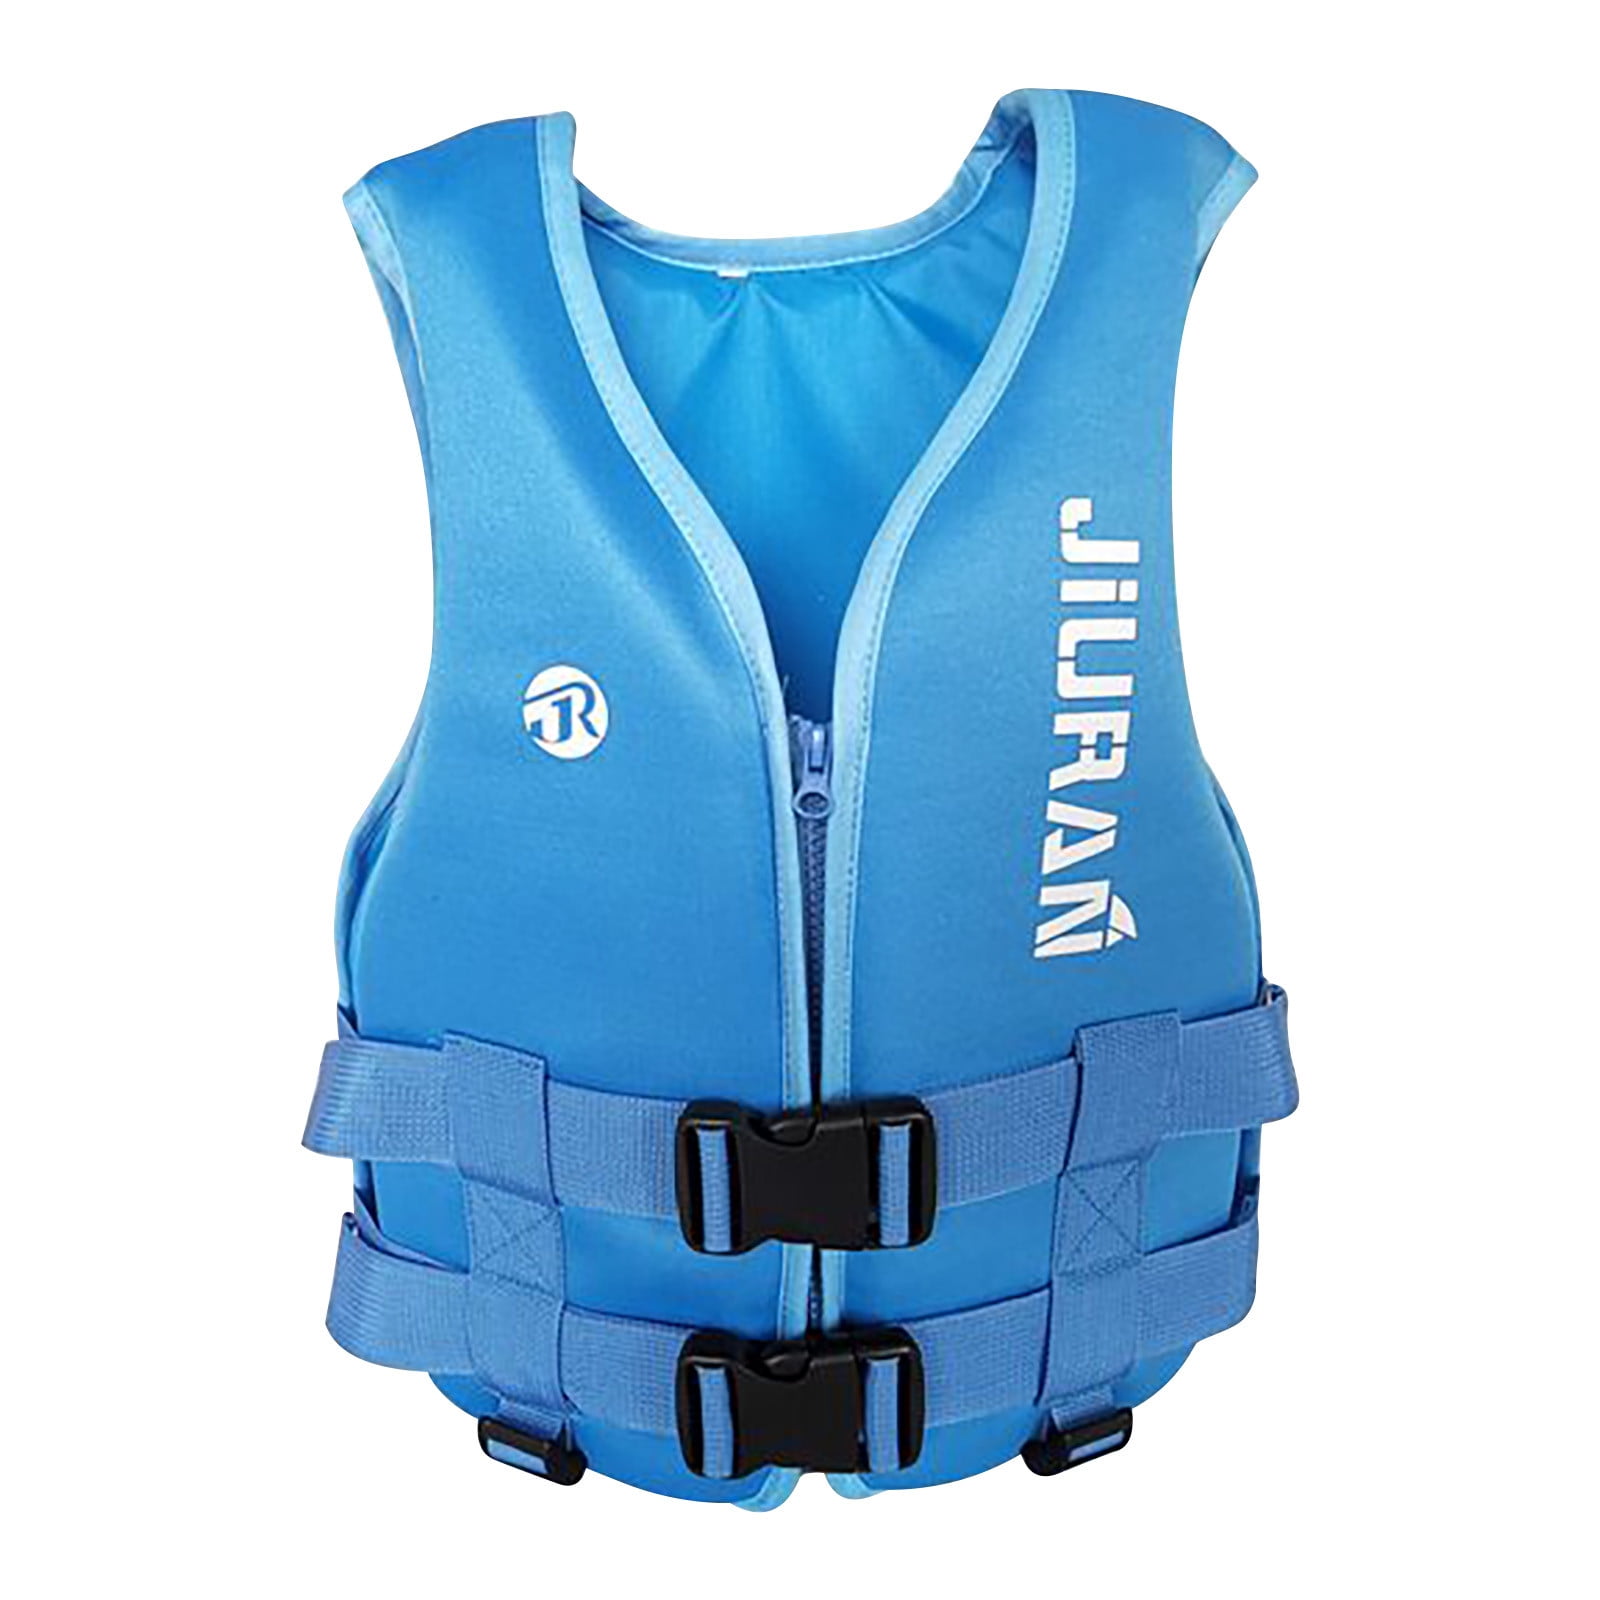 Adults Life Jacket Safety Neoprene Surfing Diving Survival Vest Swimming N4G9 